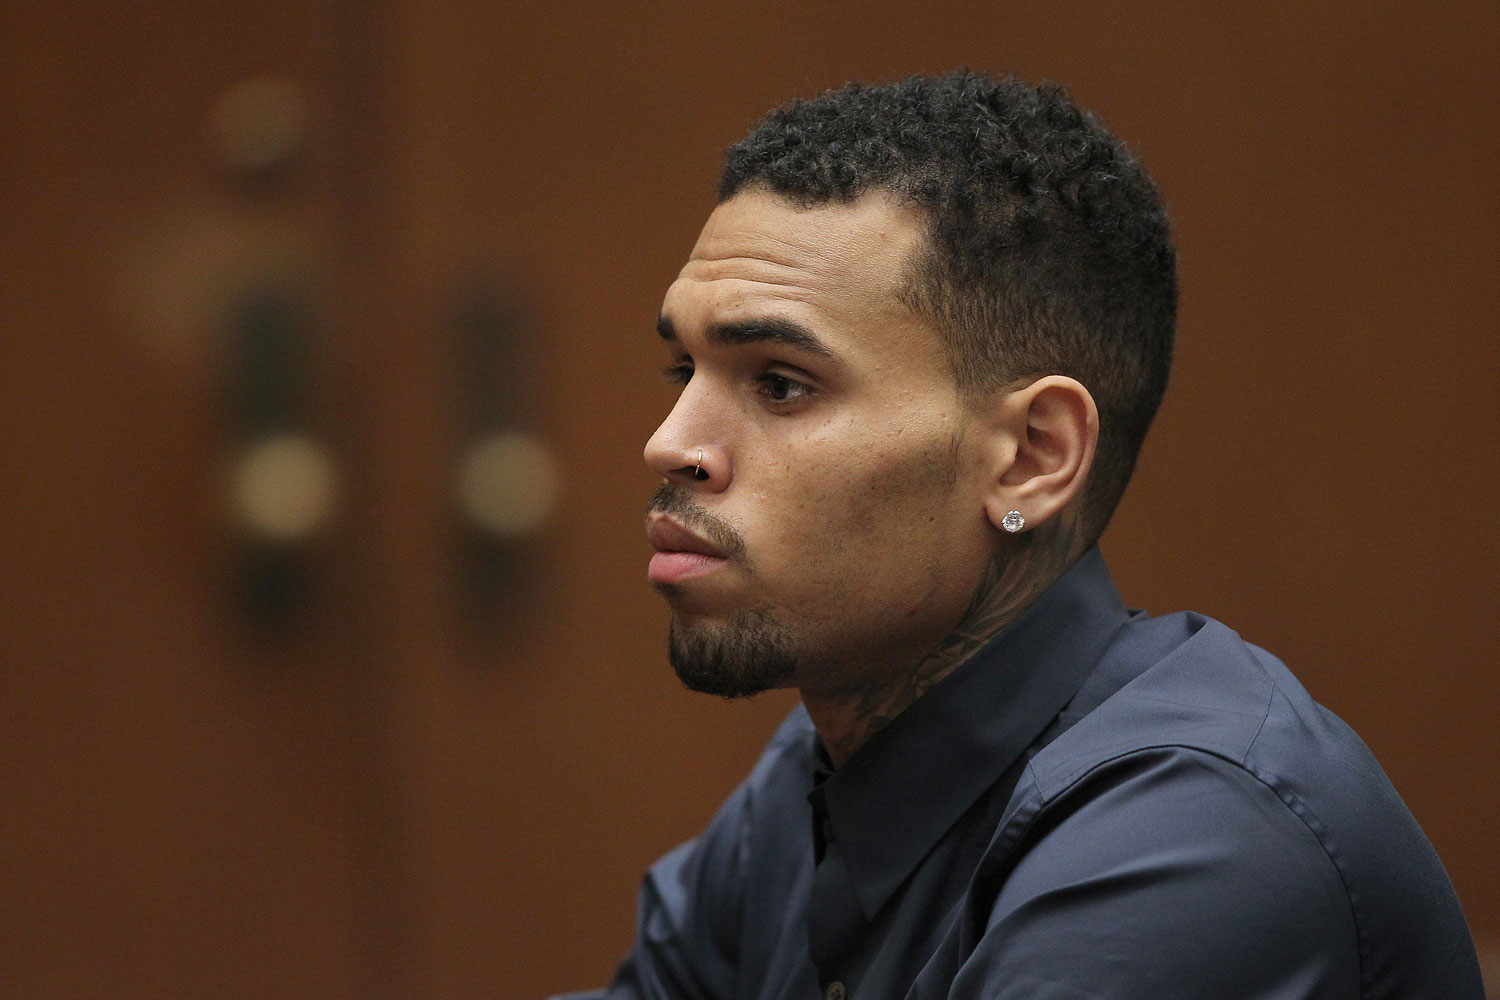 In this file photo, R&amp;B singer Chris Brown appears in court for a probation progress hearing on Feb. 3, 2014 in Los Angeles. The singer was arrested for allegedly violating his probation on March 14, 2014 in Malibu. (David McNew—Getty Images)